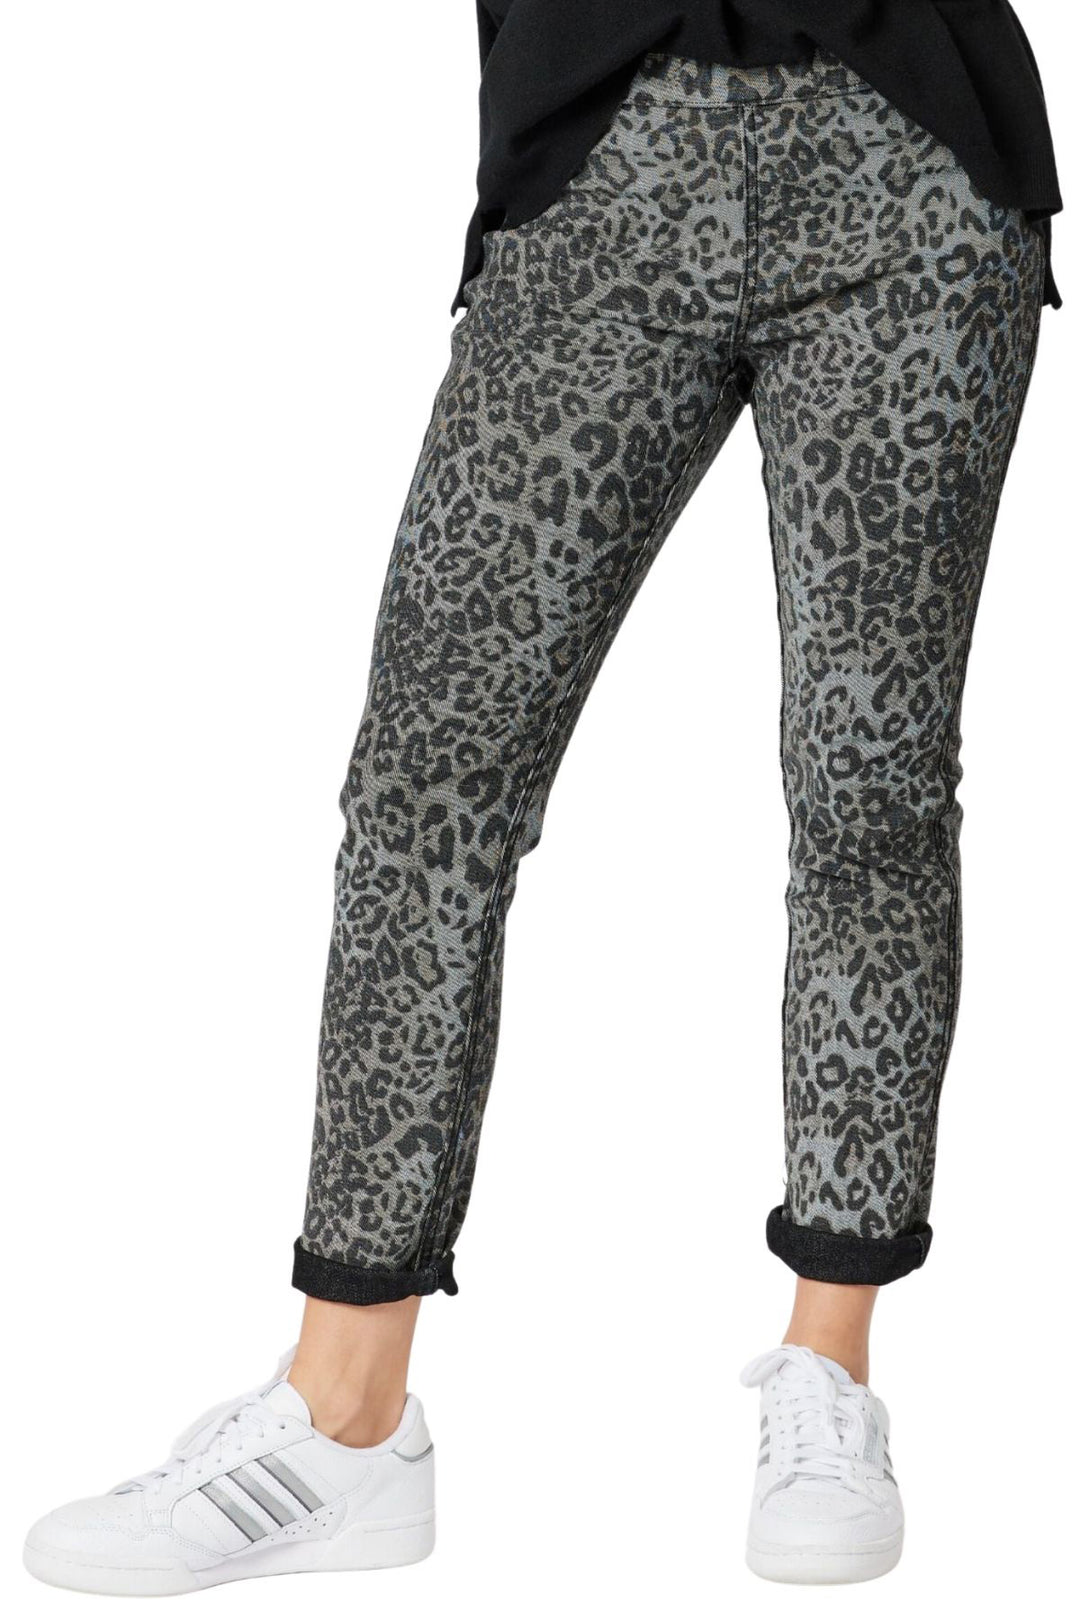 One pant ........two looks! The Reversible Jean by Threadz is a stretchy denim jean with an elastic waistband and pull on style. Printed leopard denim on one side and plain denim on the reverse lets you decide your look for the day.